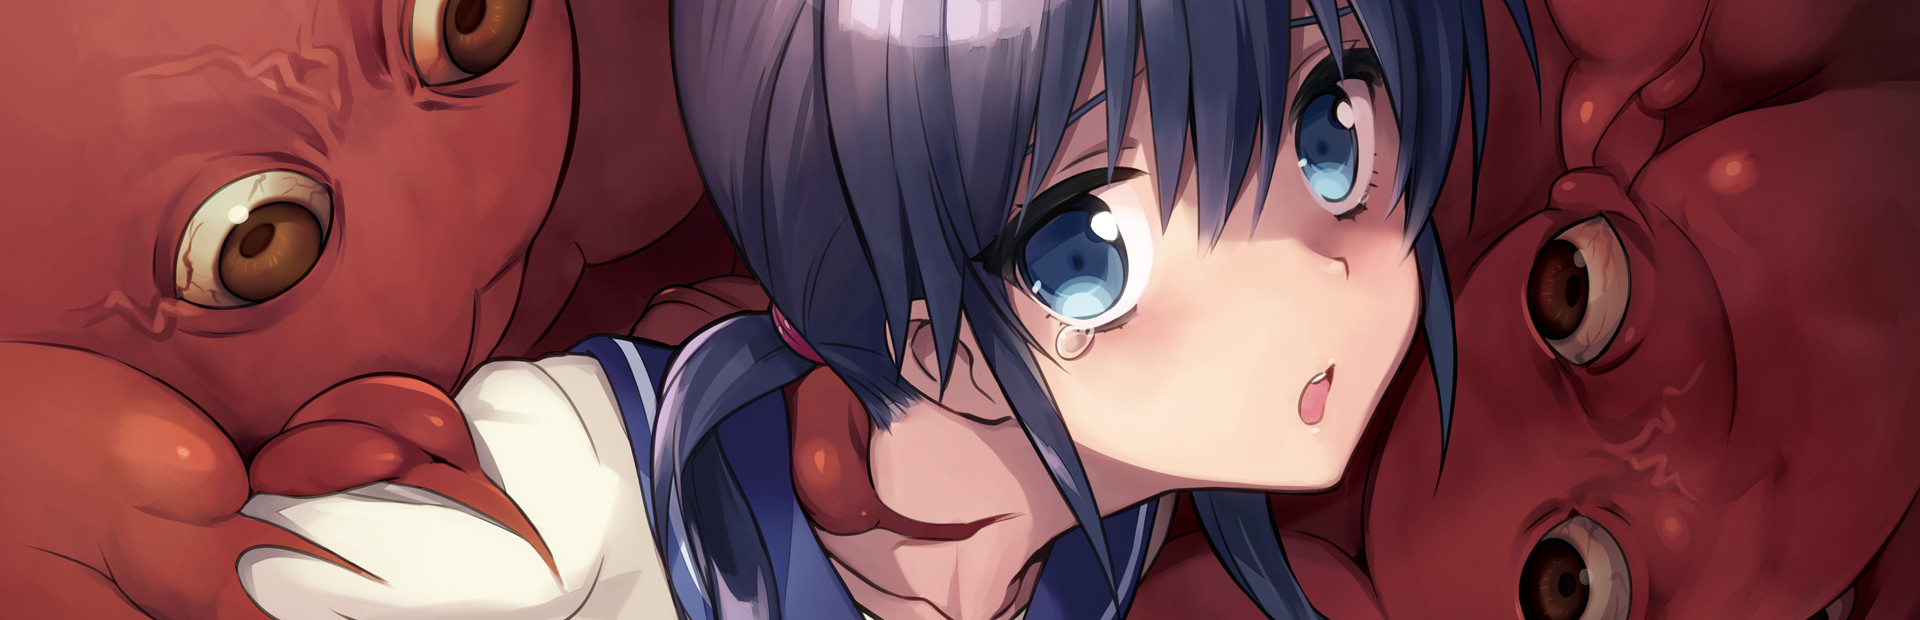 Corpse Party: Blood Drive cover image